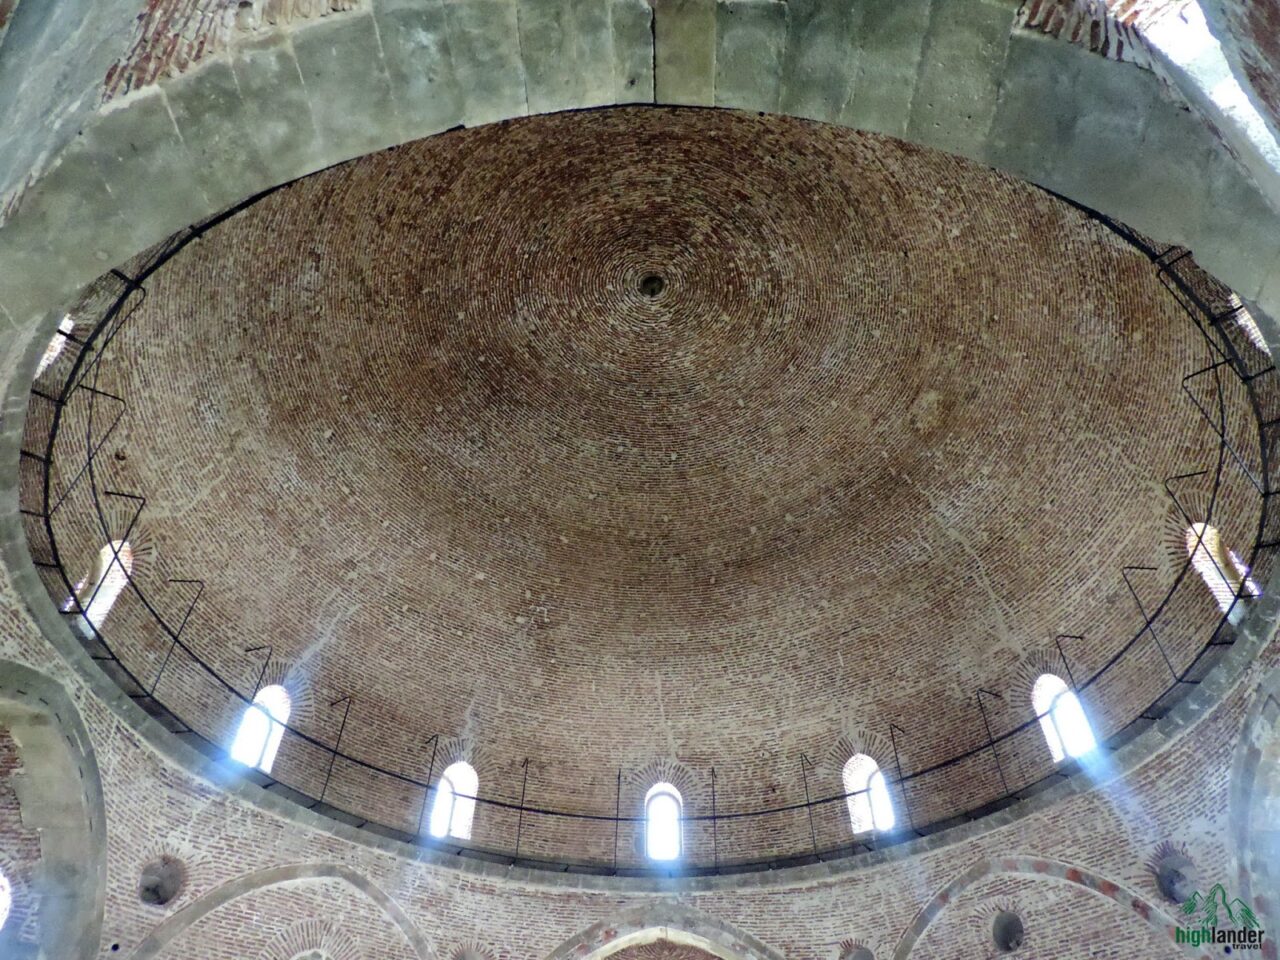 Dome of mosque